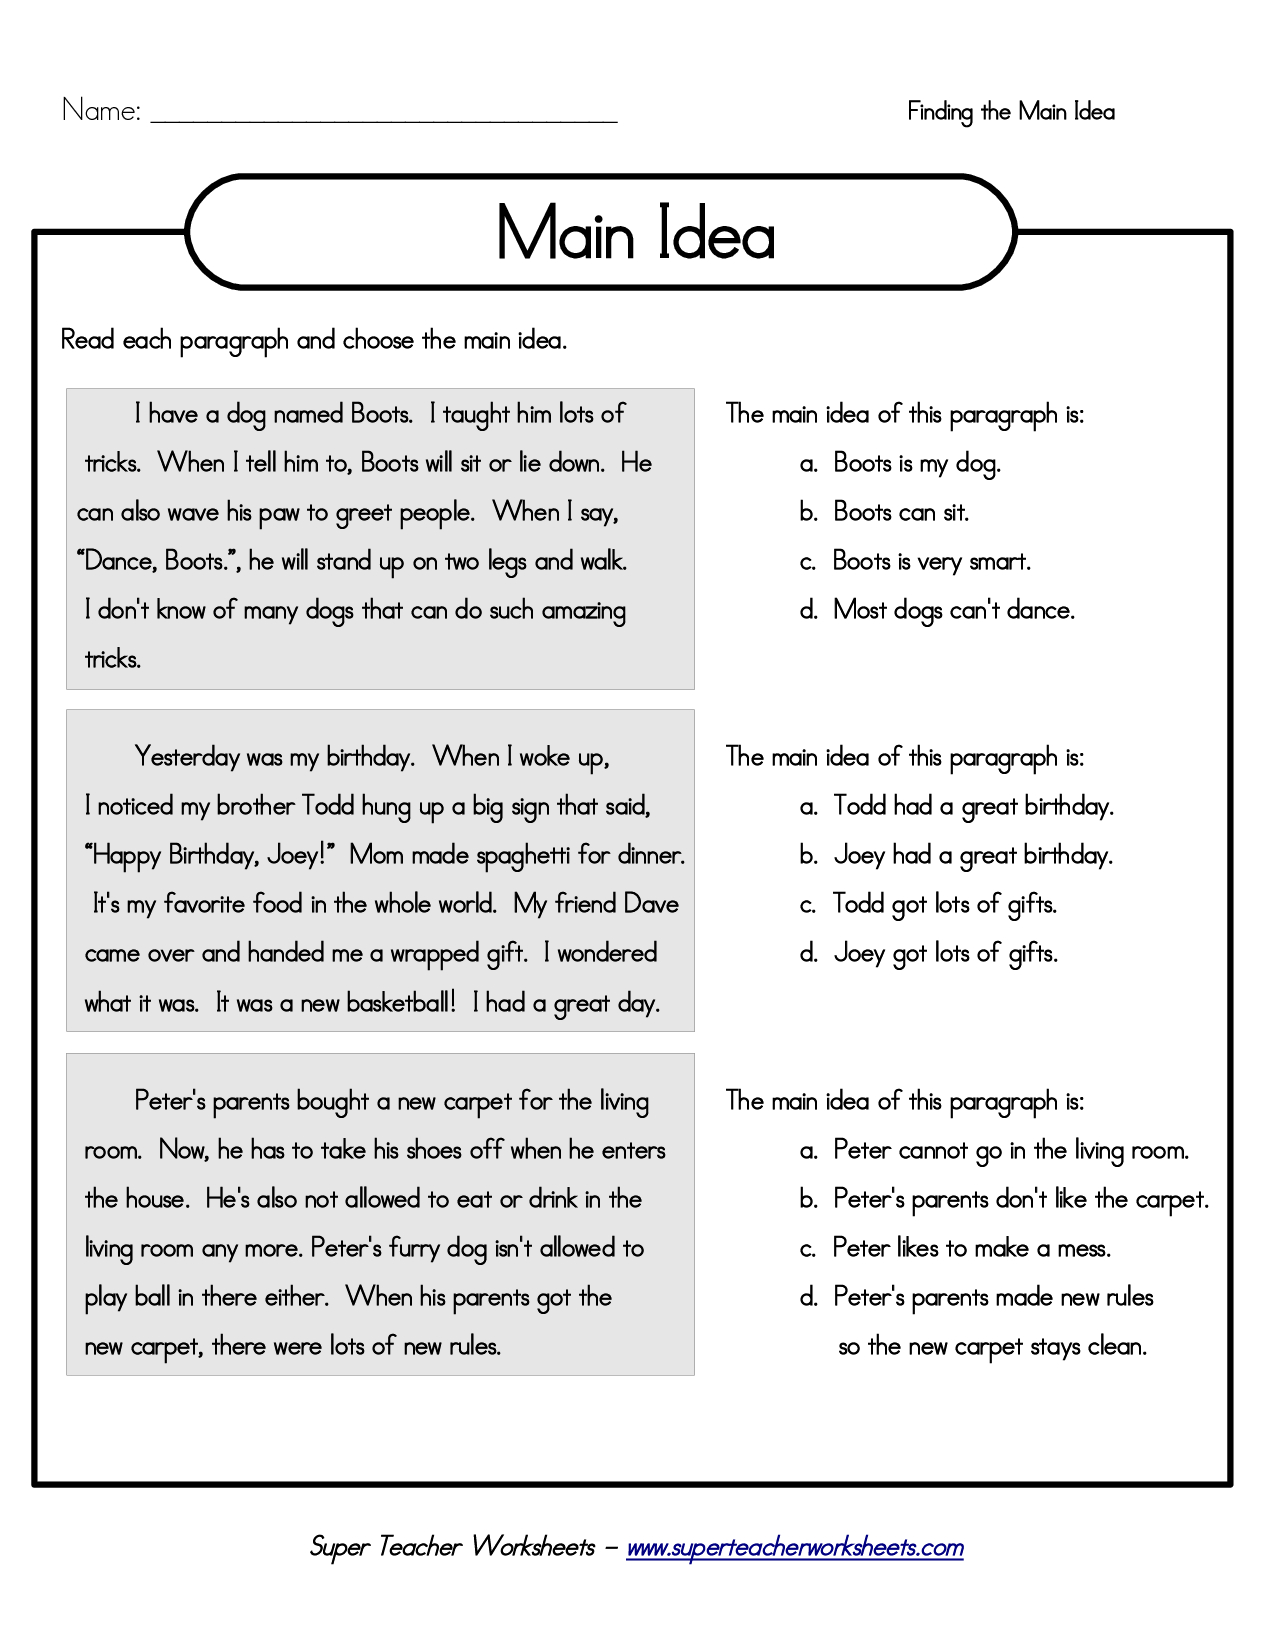 15 Best Images Of Main Idea Supporting Detail Worksheets